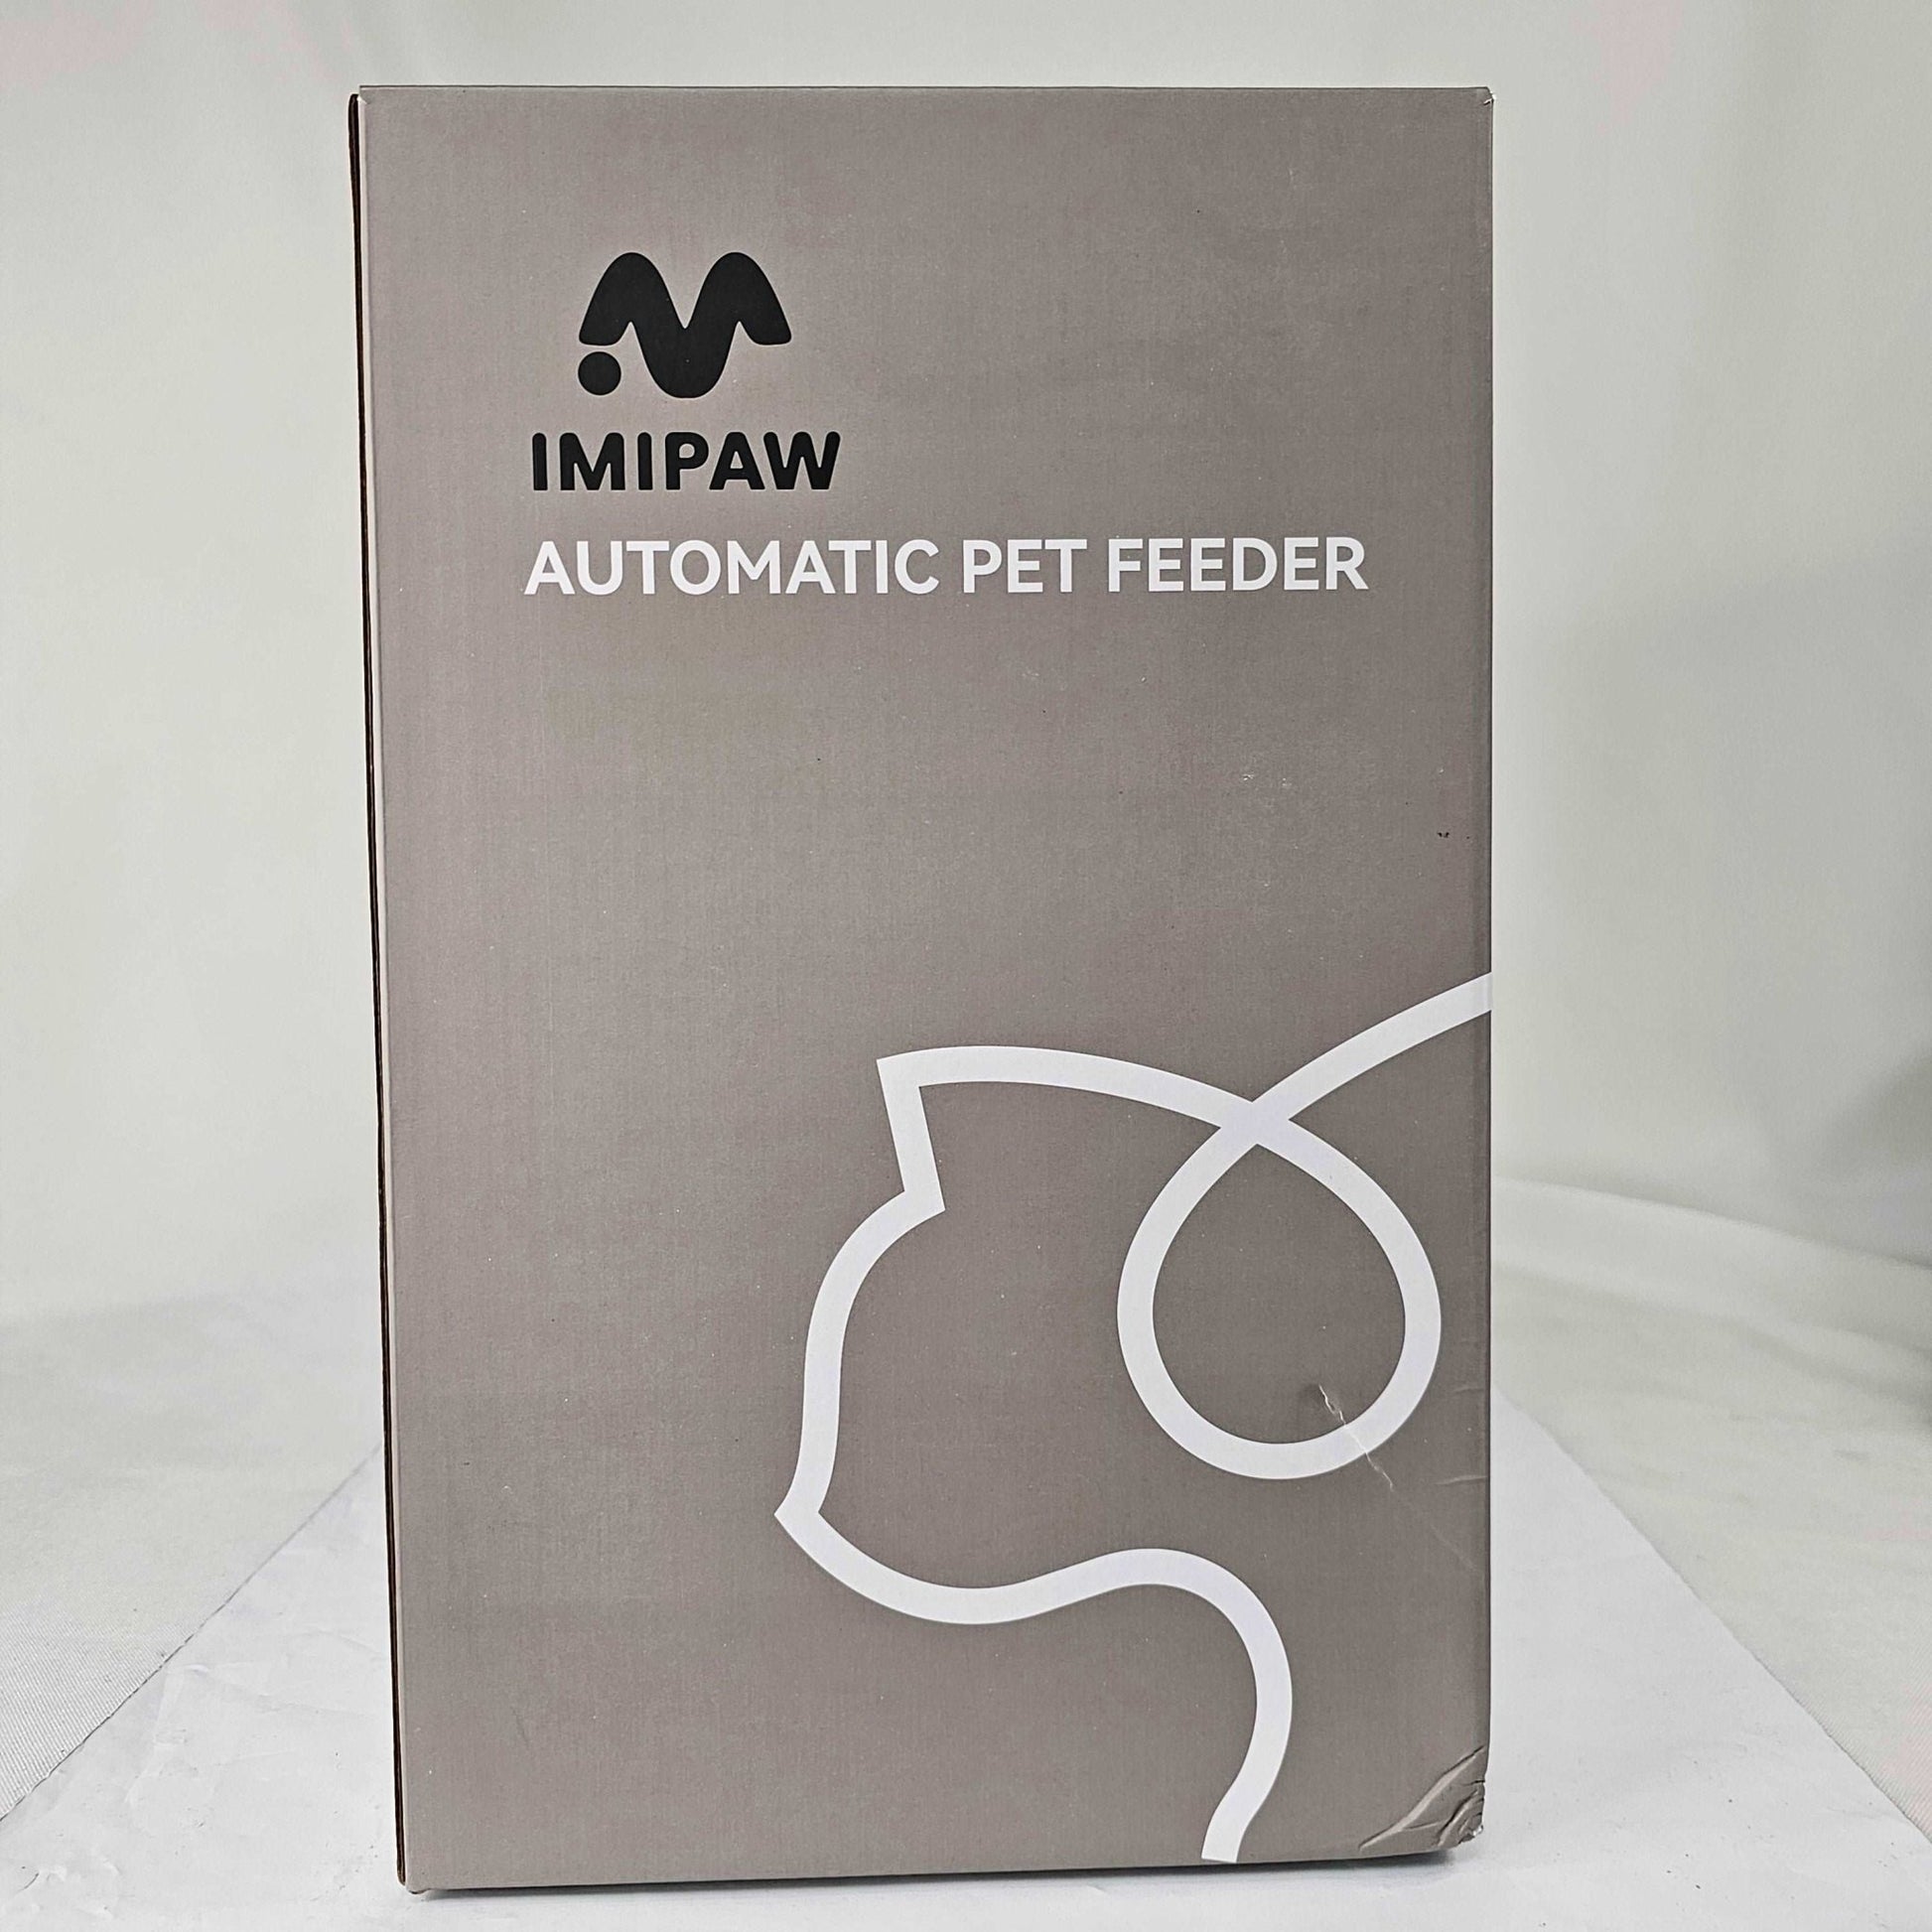 Automatic Pet Feeder Imipaw - DQ Distribution